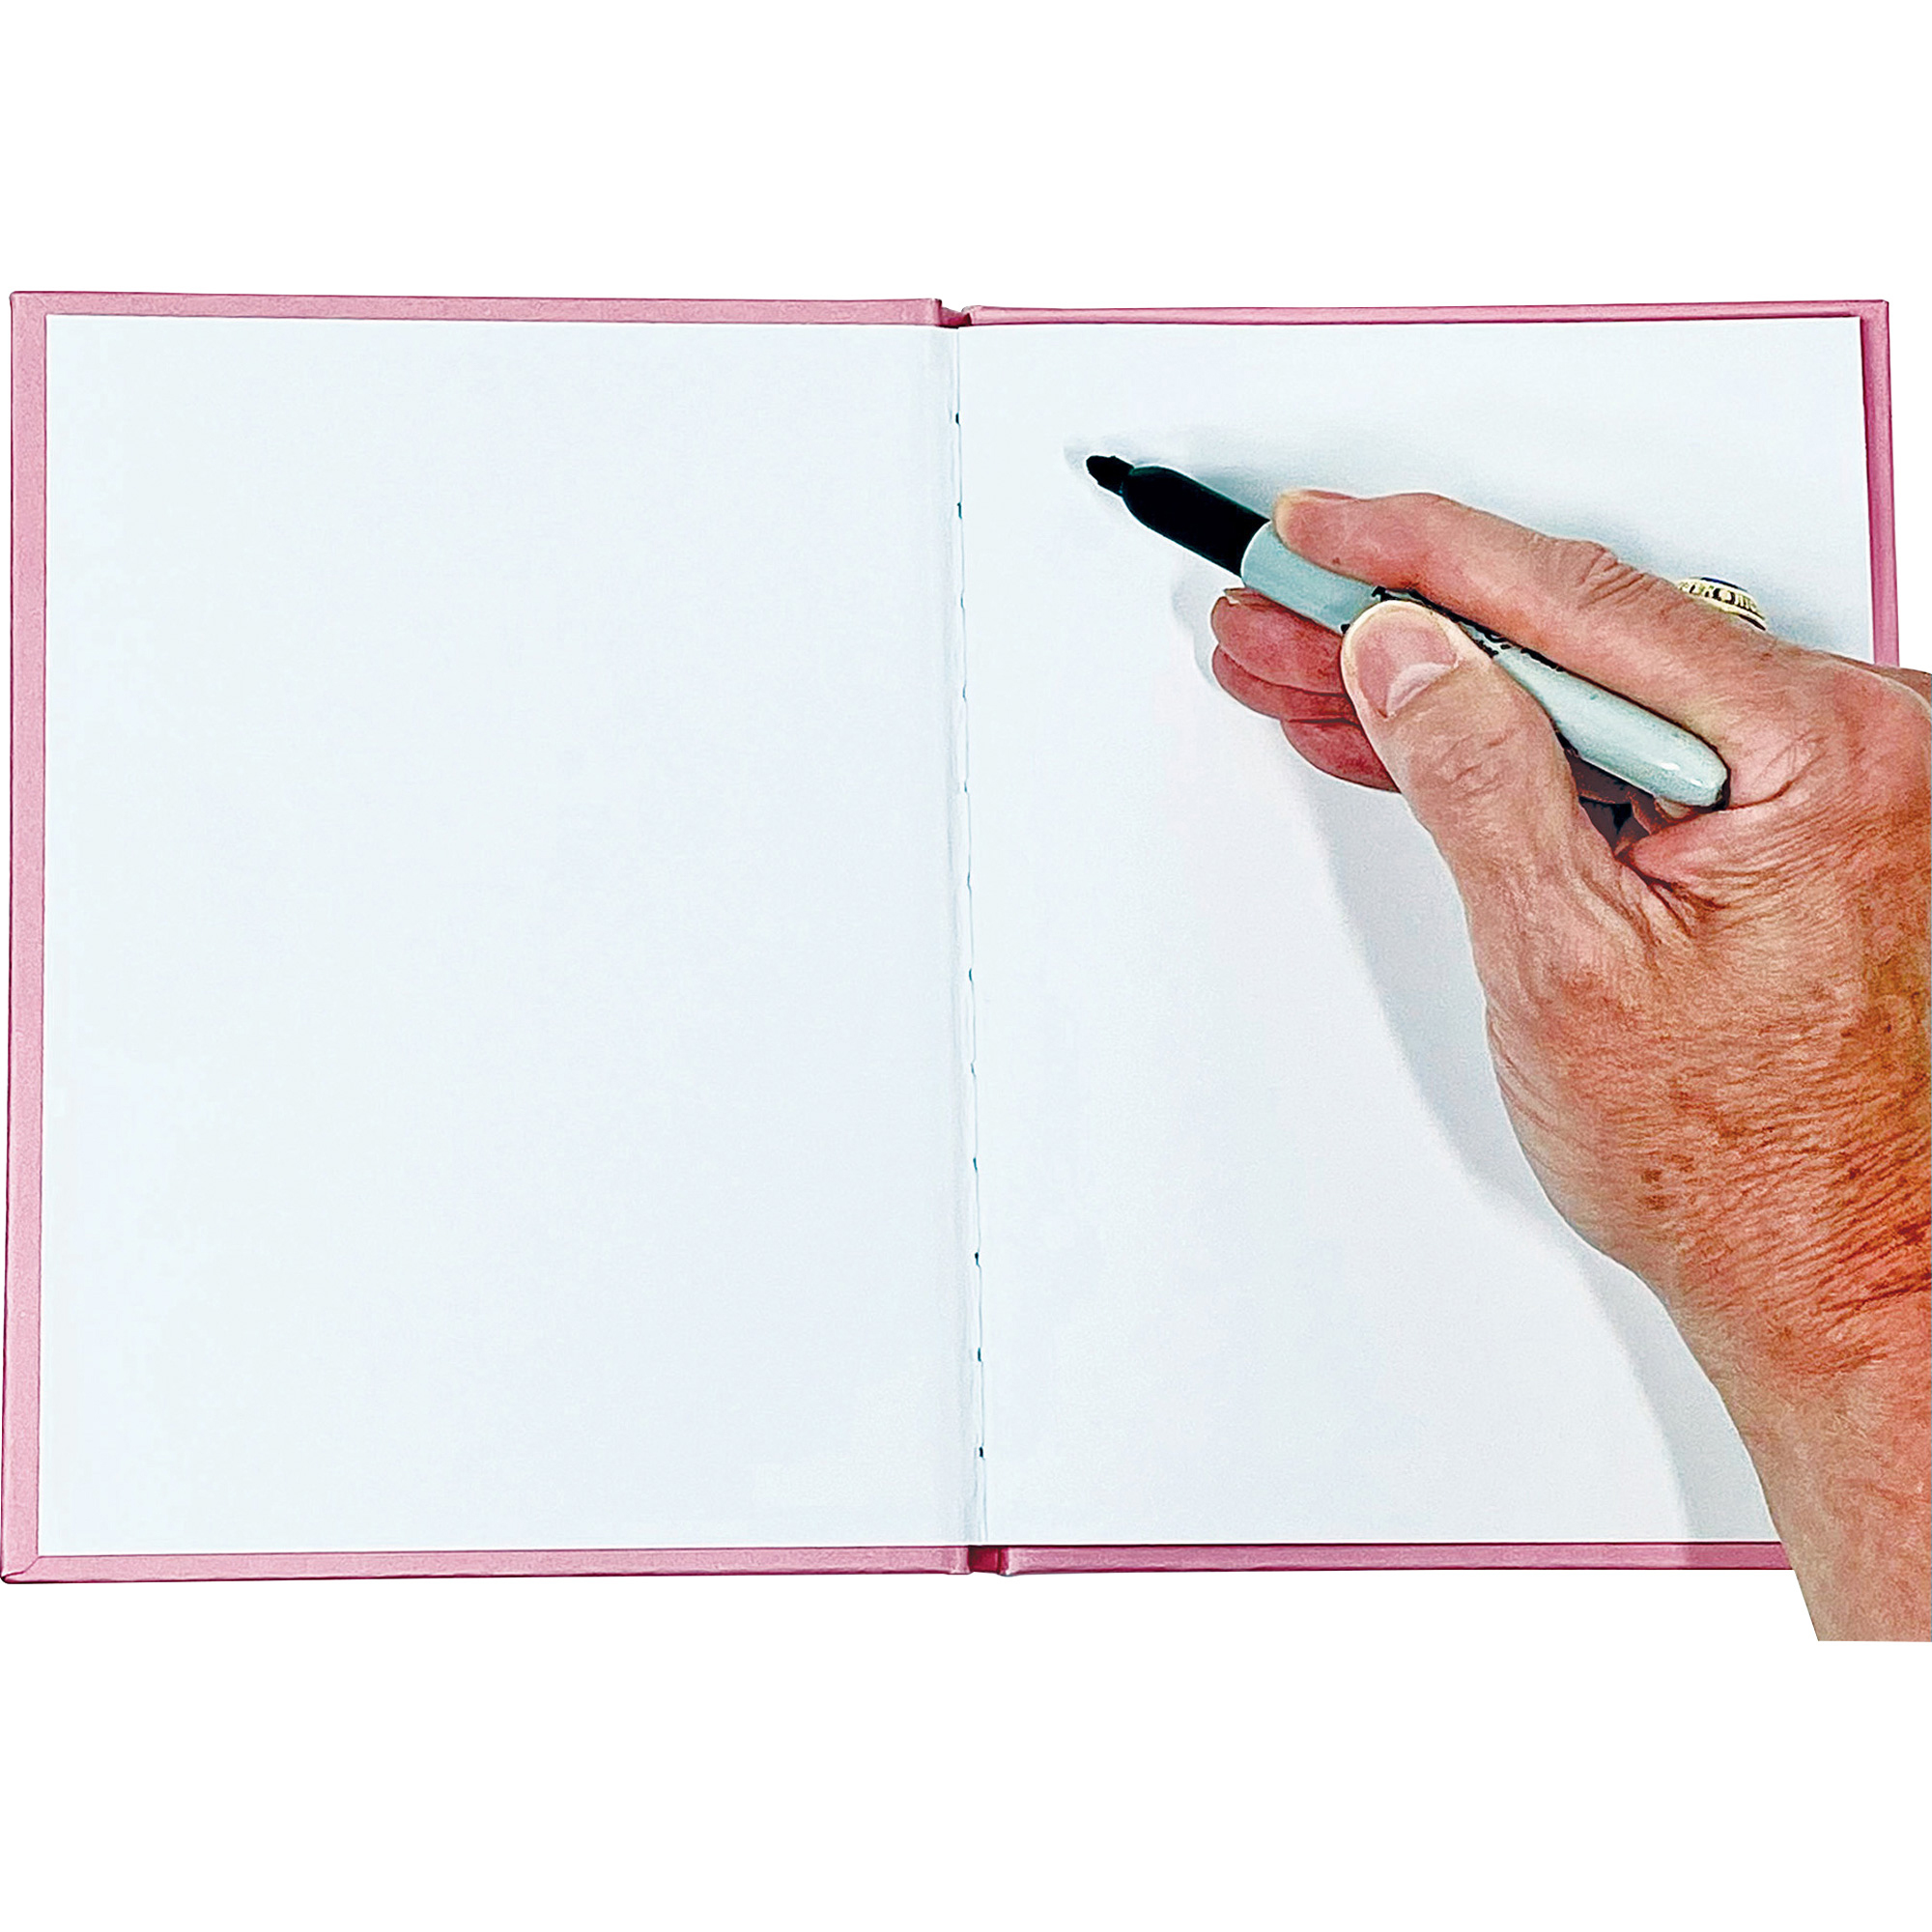 Plain white hardcover blank book, 28 pages (14 sheets) Measures 8 w x 6 h  - H-BK400, Flipside